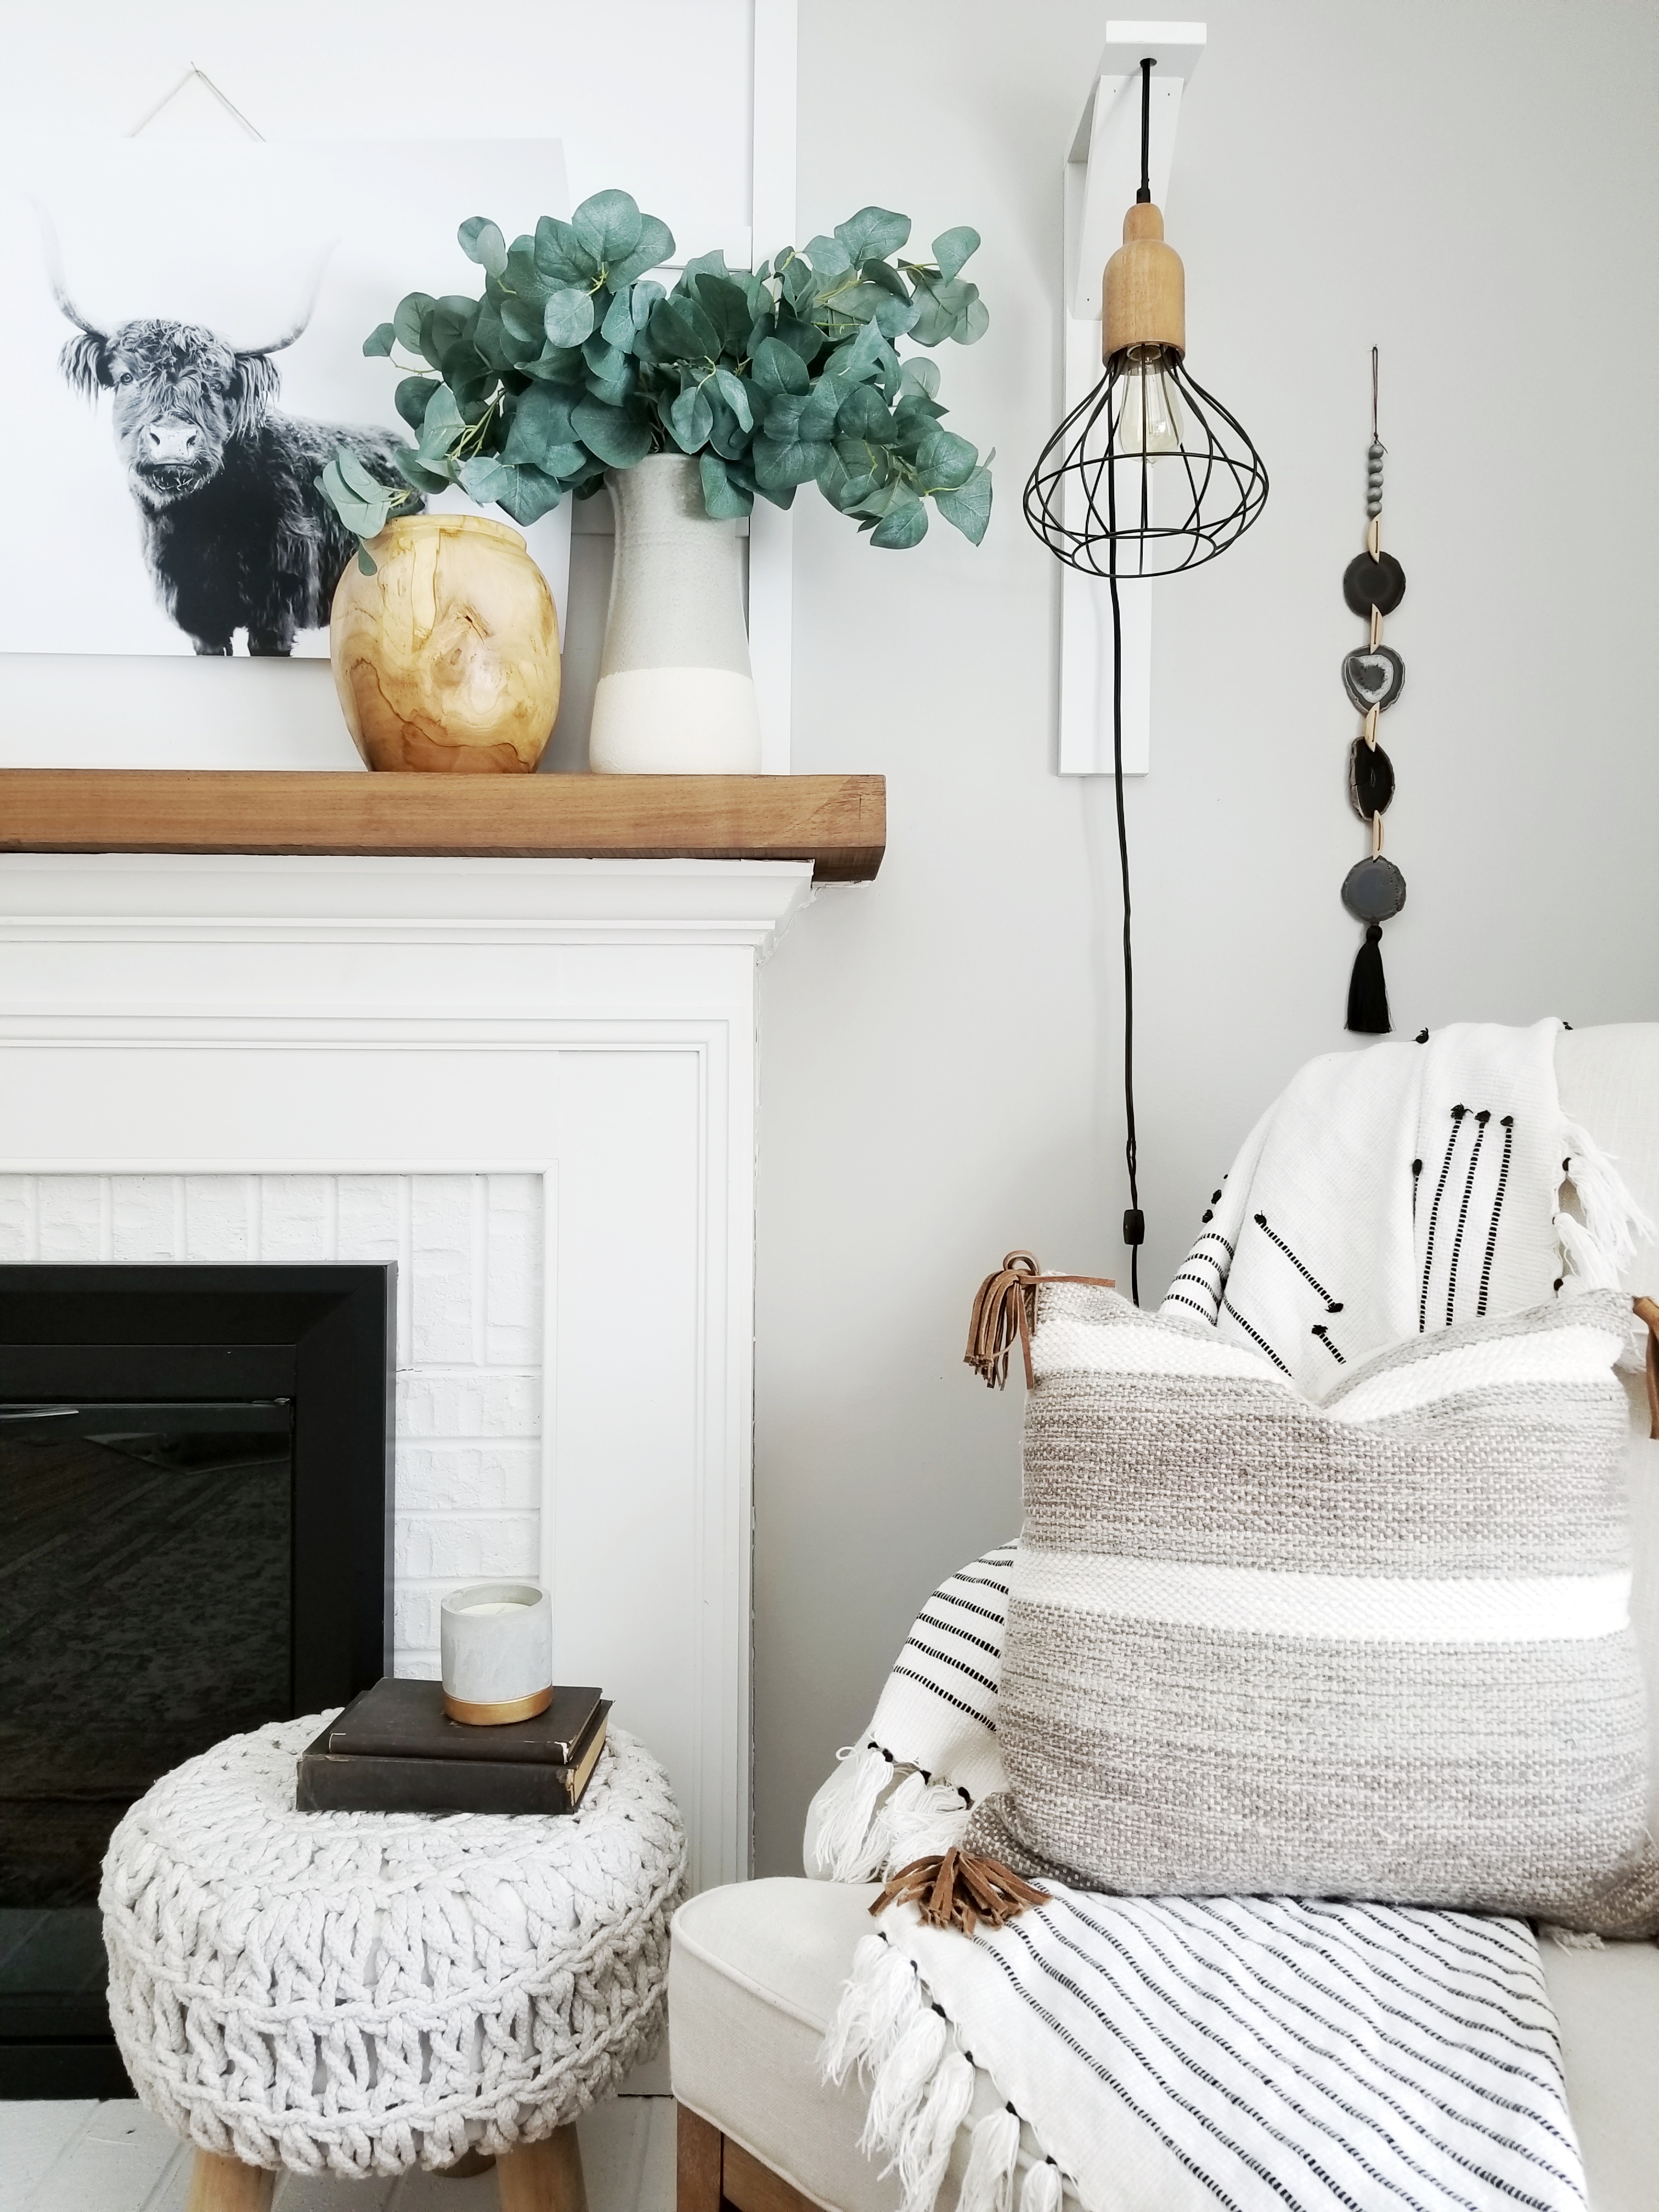 Use throw blankets to add texture to your home decor.